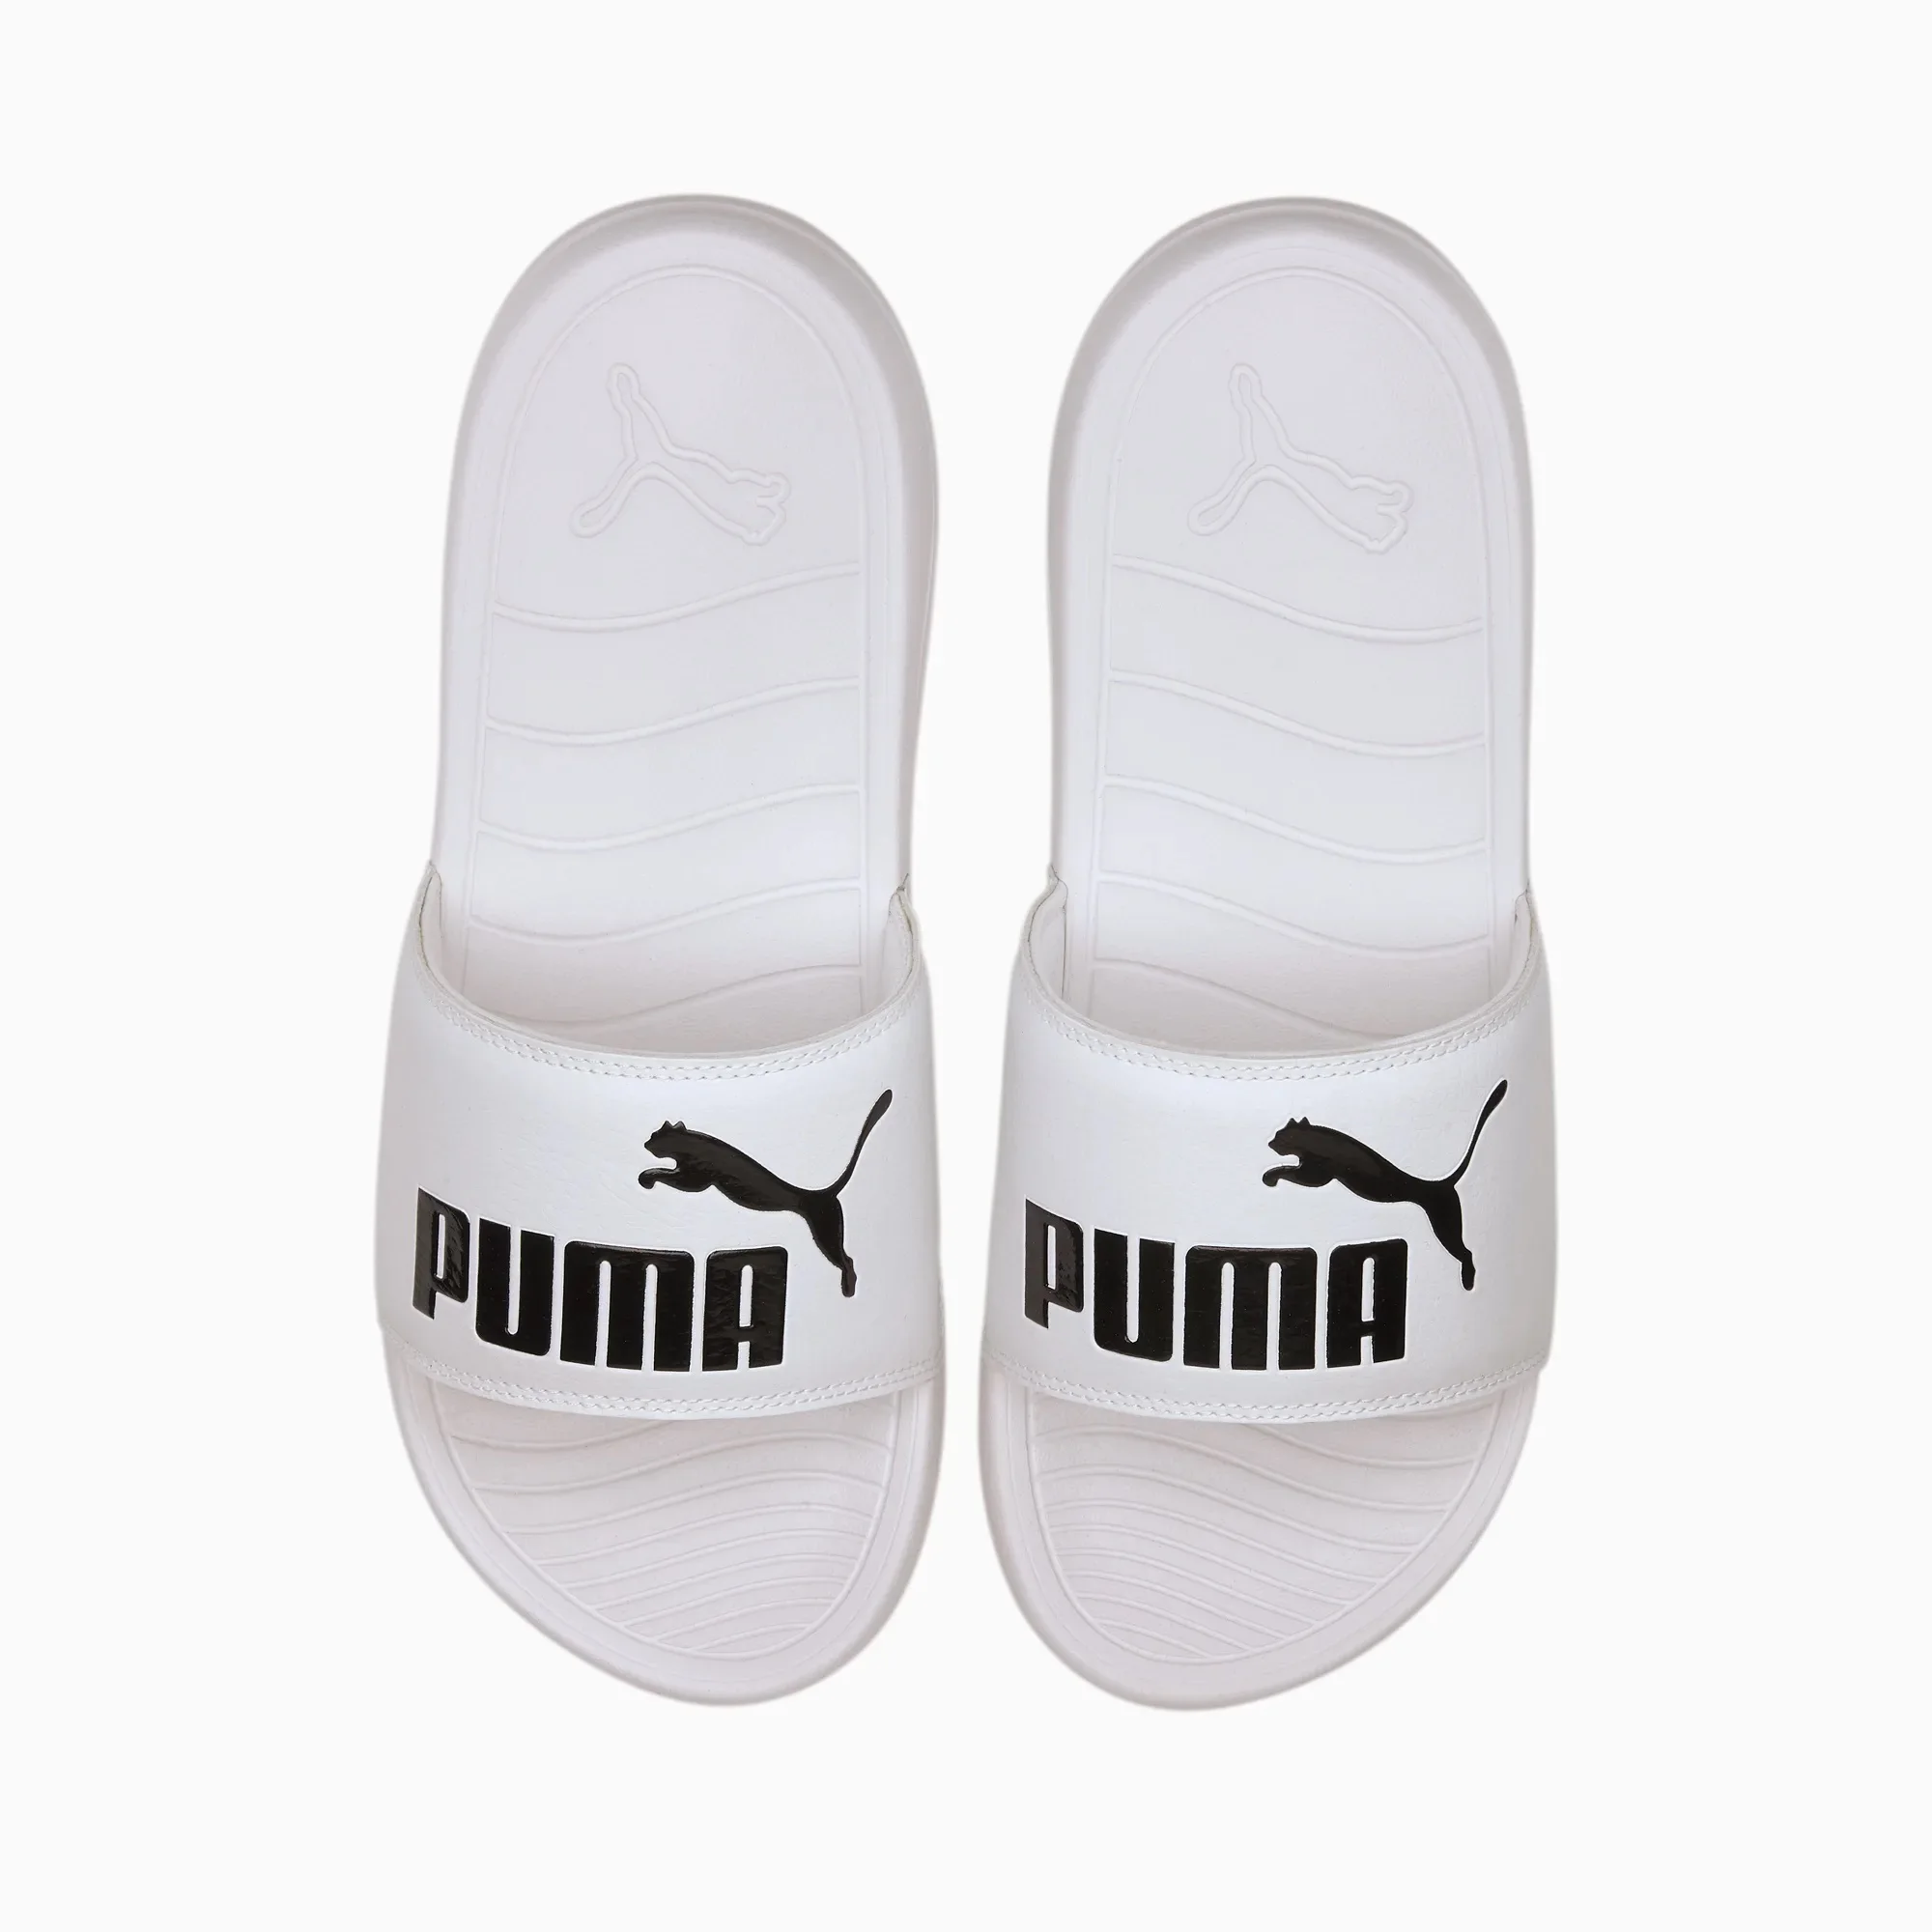 Puma Sports Flip Flops, Popcat 20, Male, Casual, Pisicina, Beach, With Black Details, Brand Logo On Strip, Eva Injected Sole For Added Softness And Comfort - & Outdoor Sandals - AliExpress